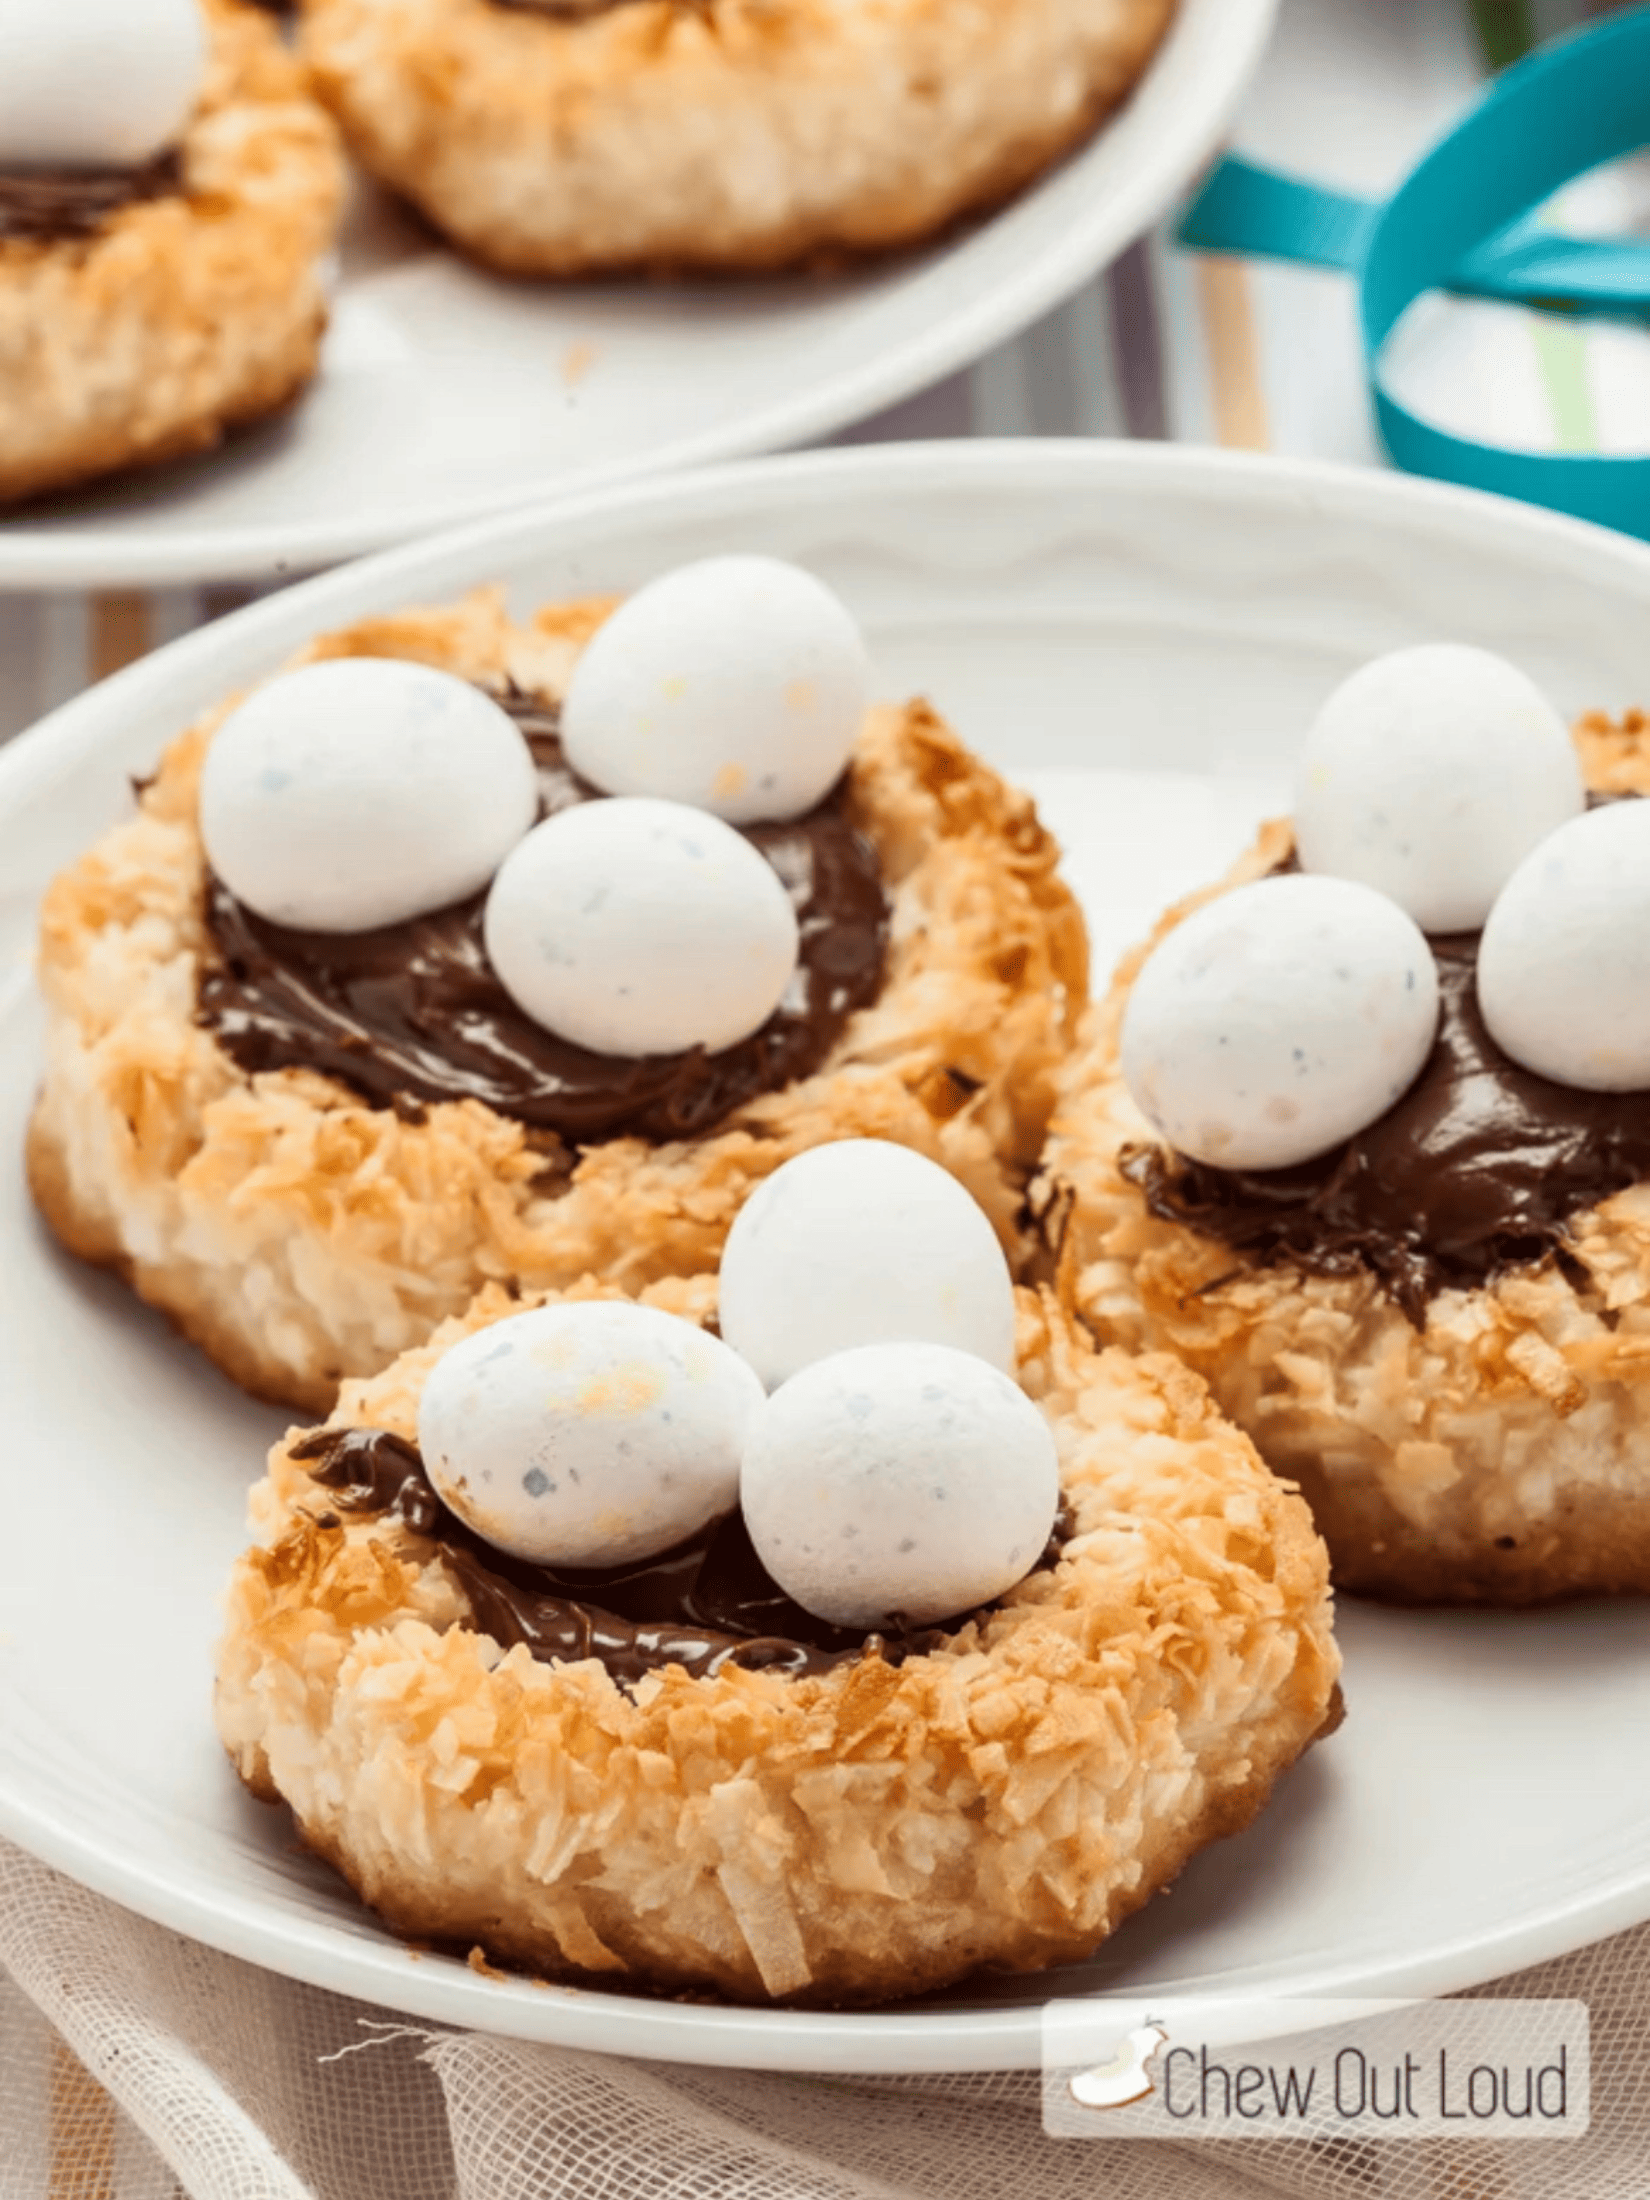 delicious coconut macaroon nest cookies filled with Nutella.